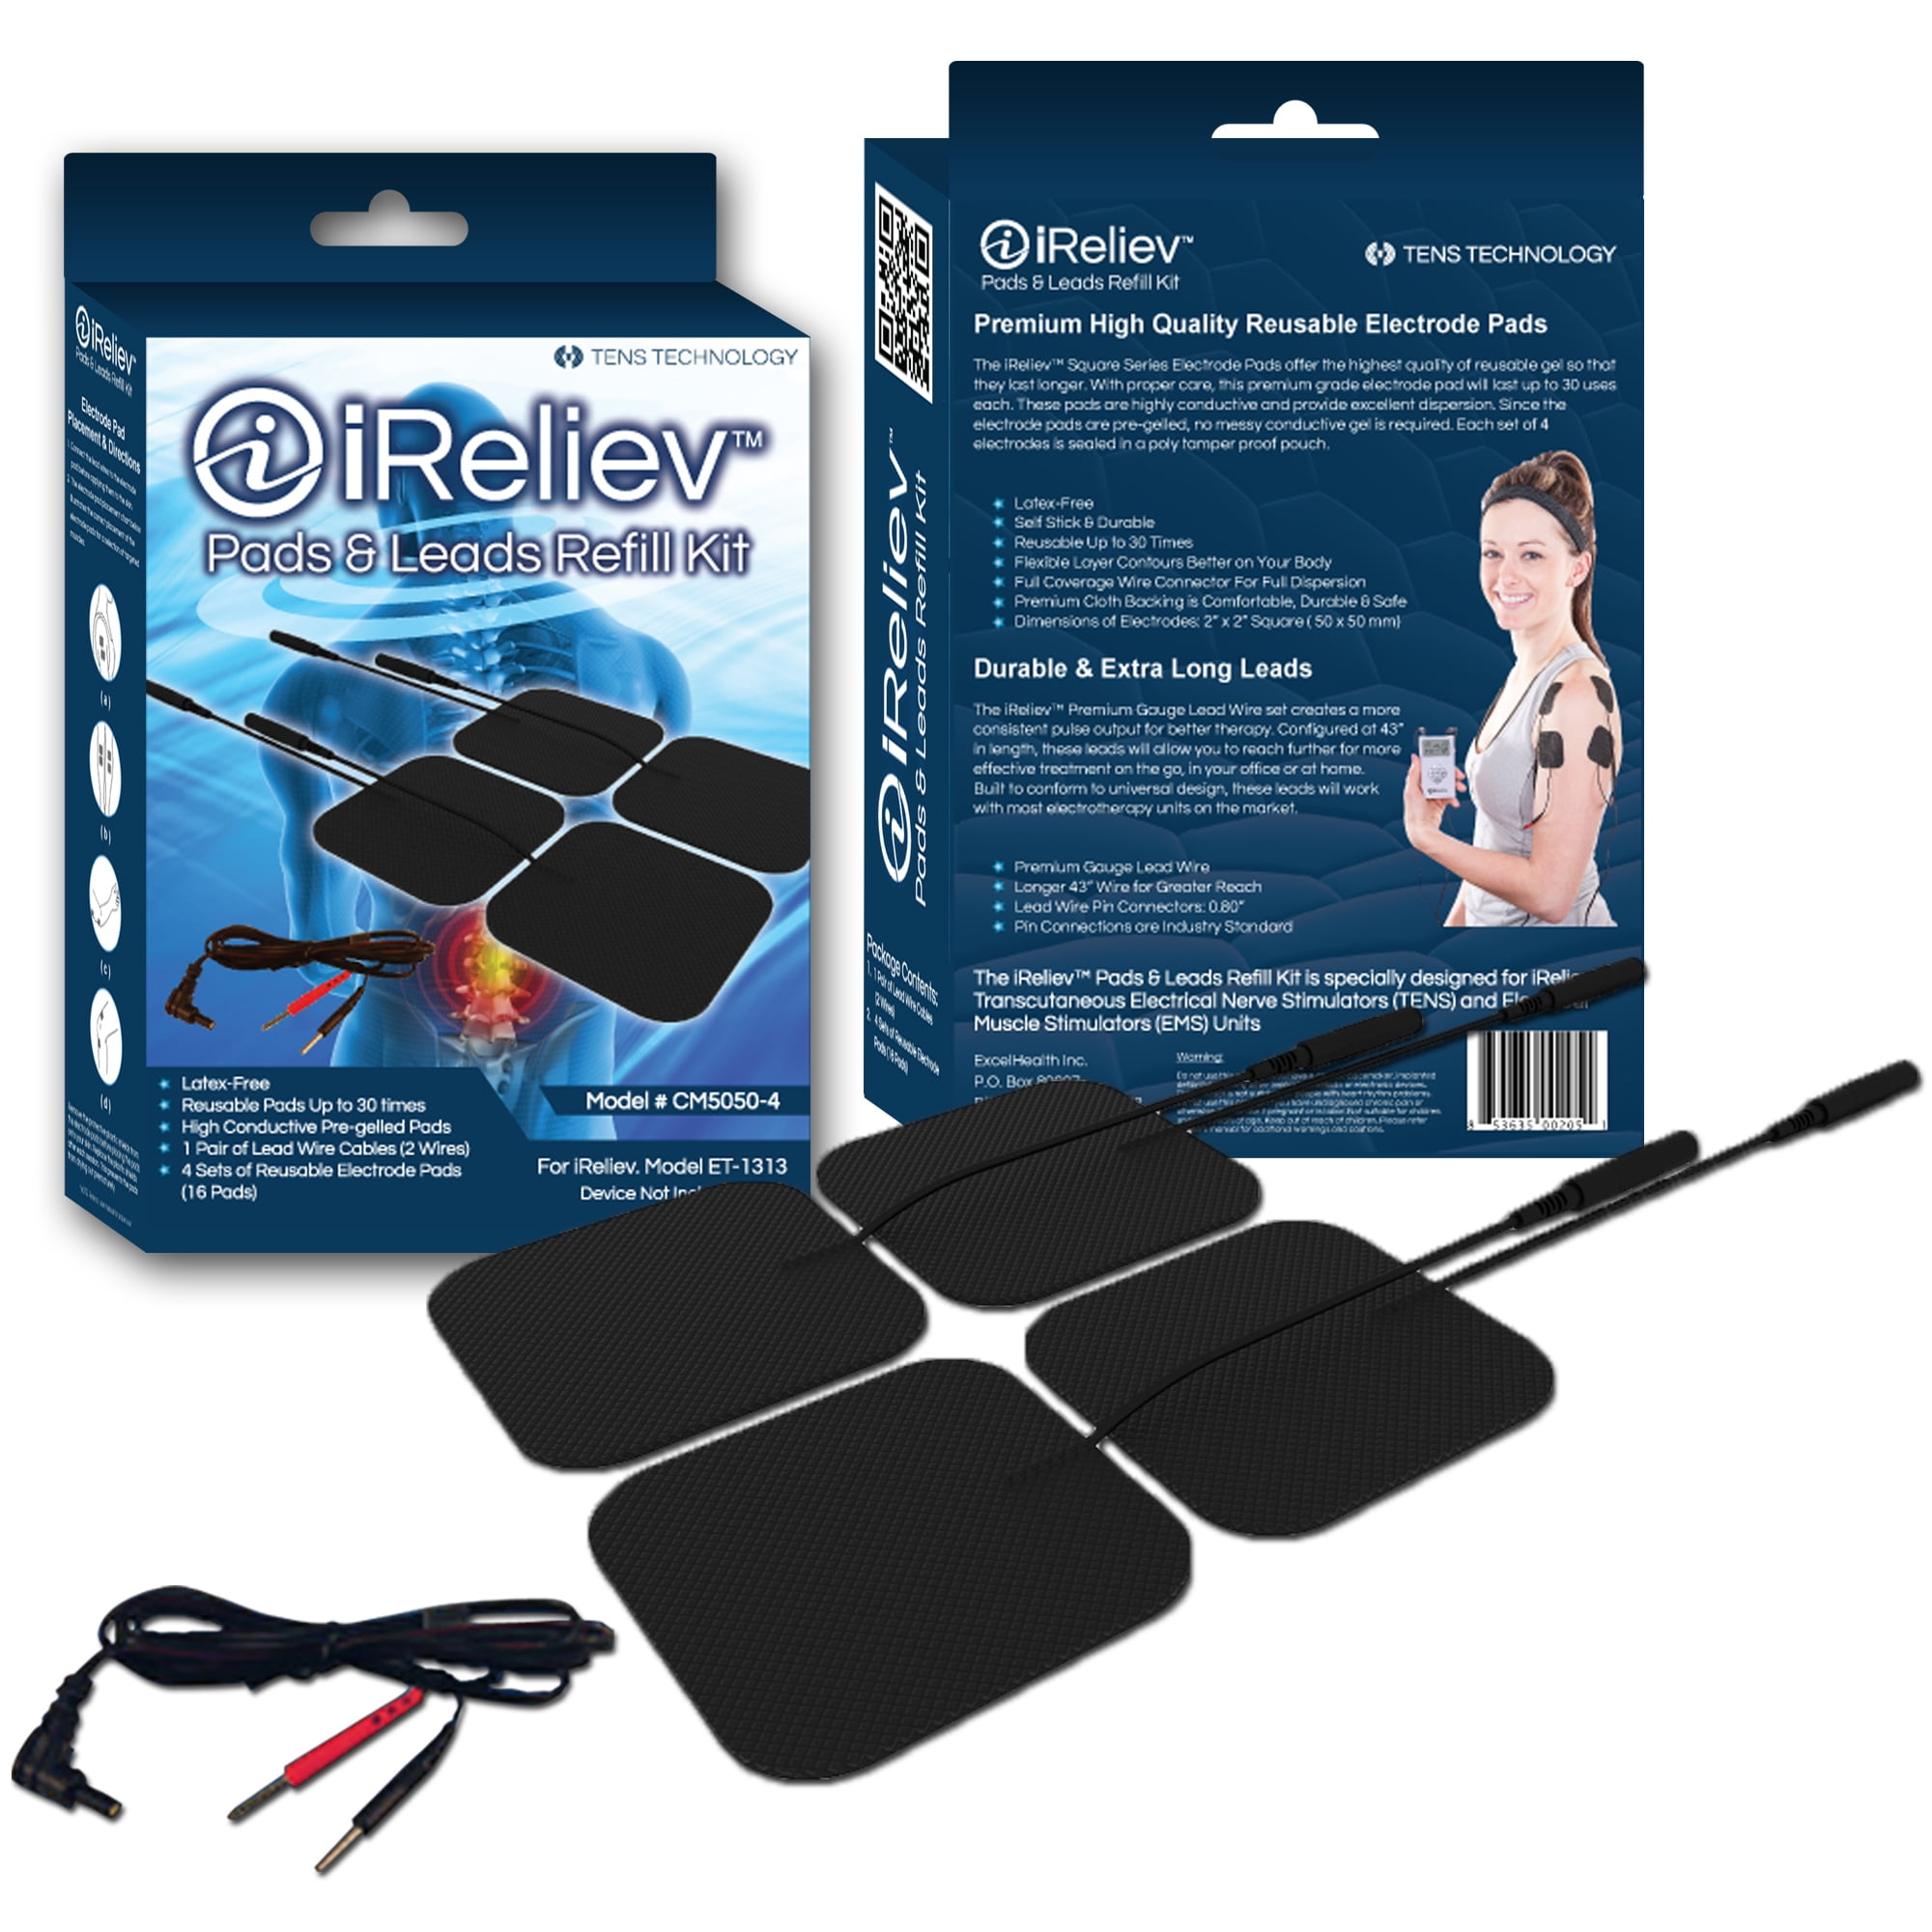 Electrode Pads & Leads Refill Kit for TENS Unit or EMS Muscle Stimulator  from iReliev 